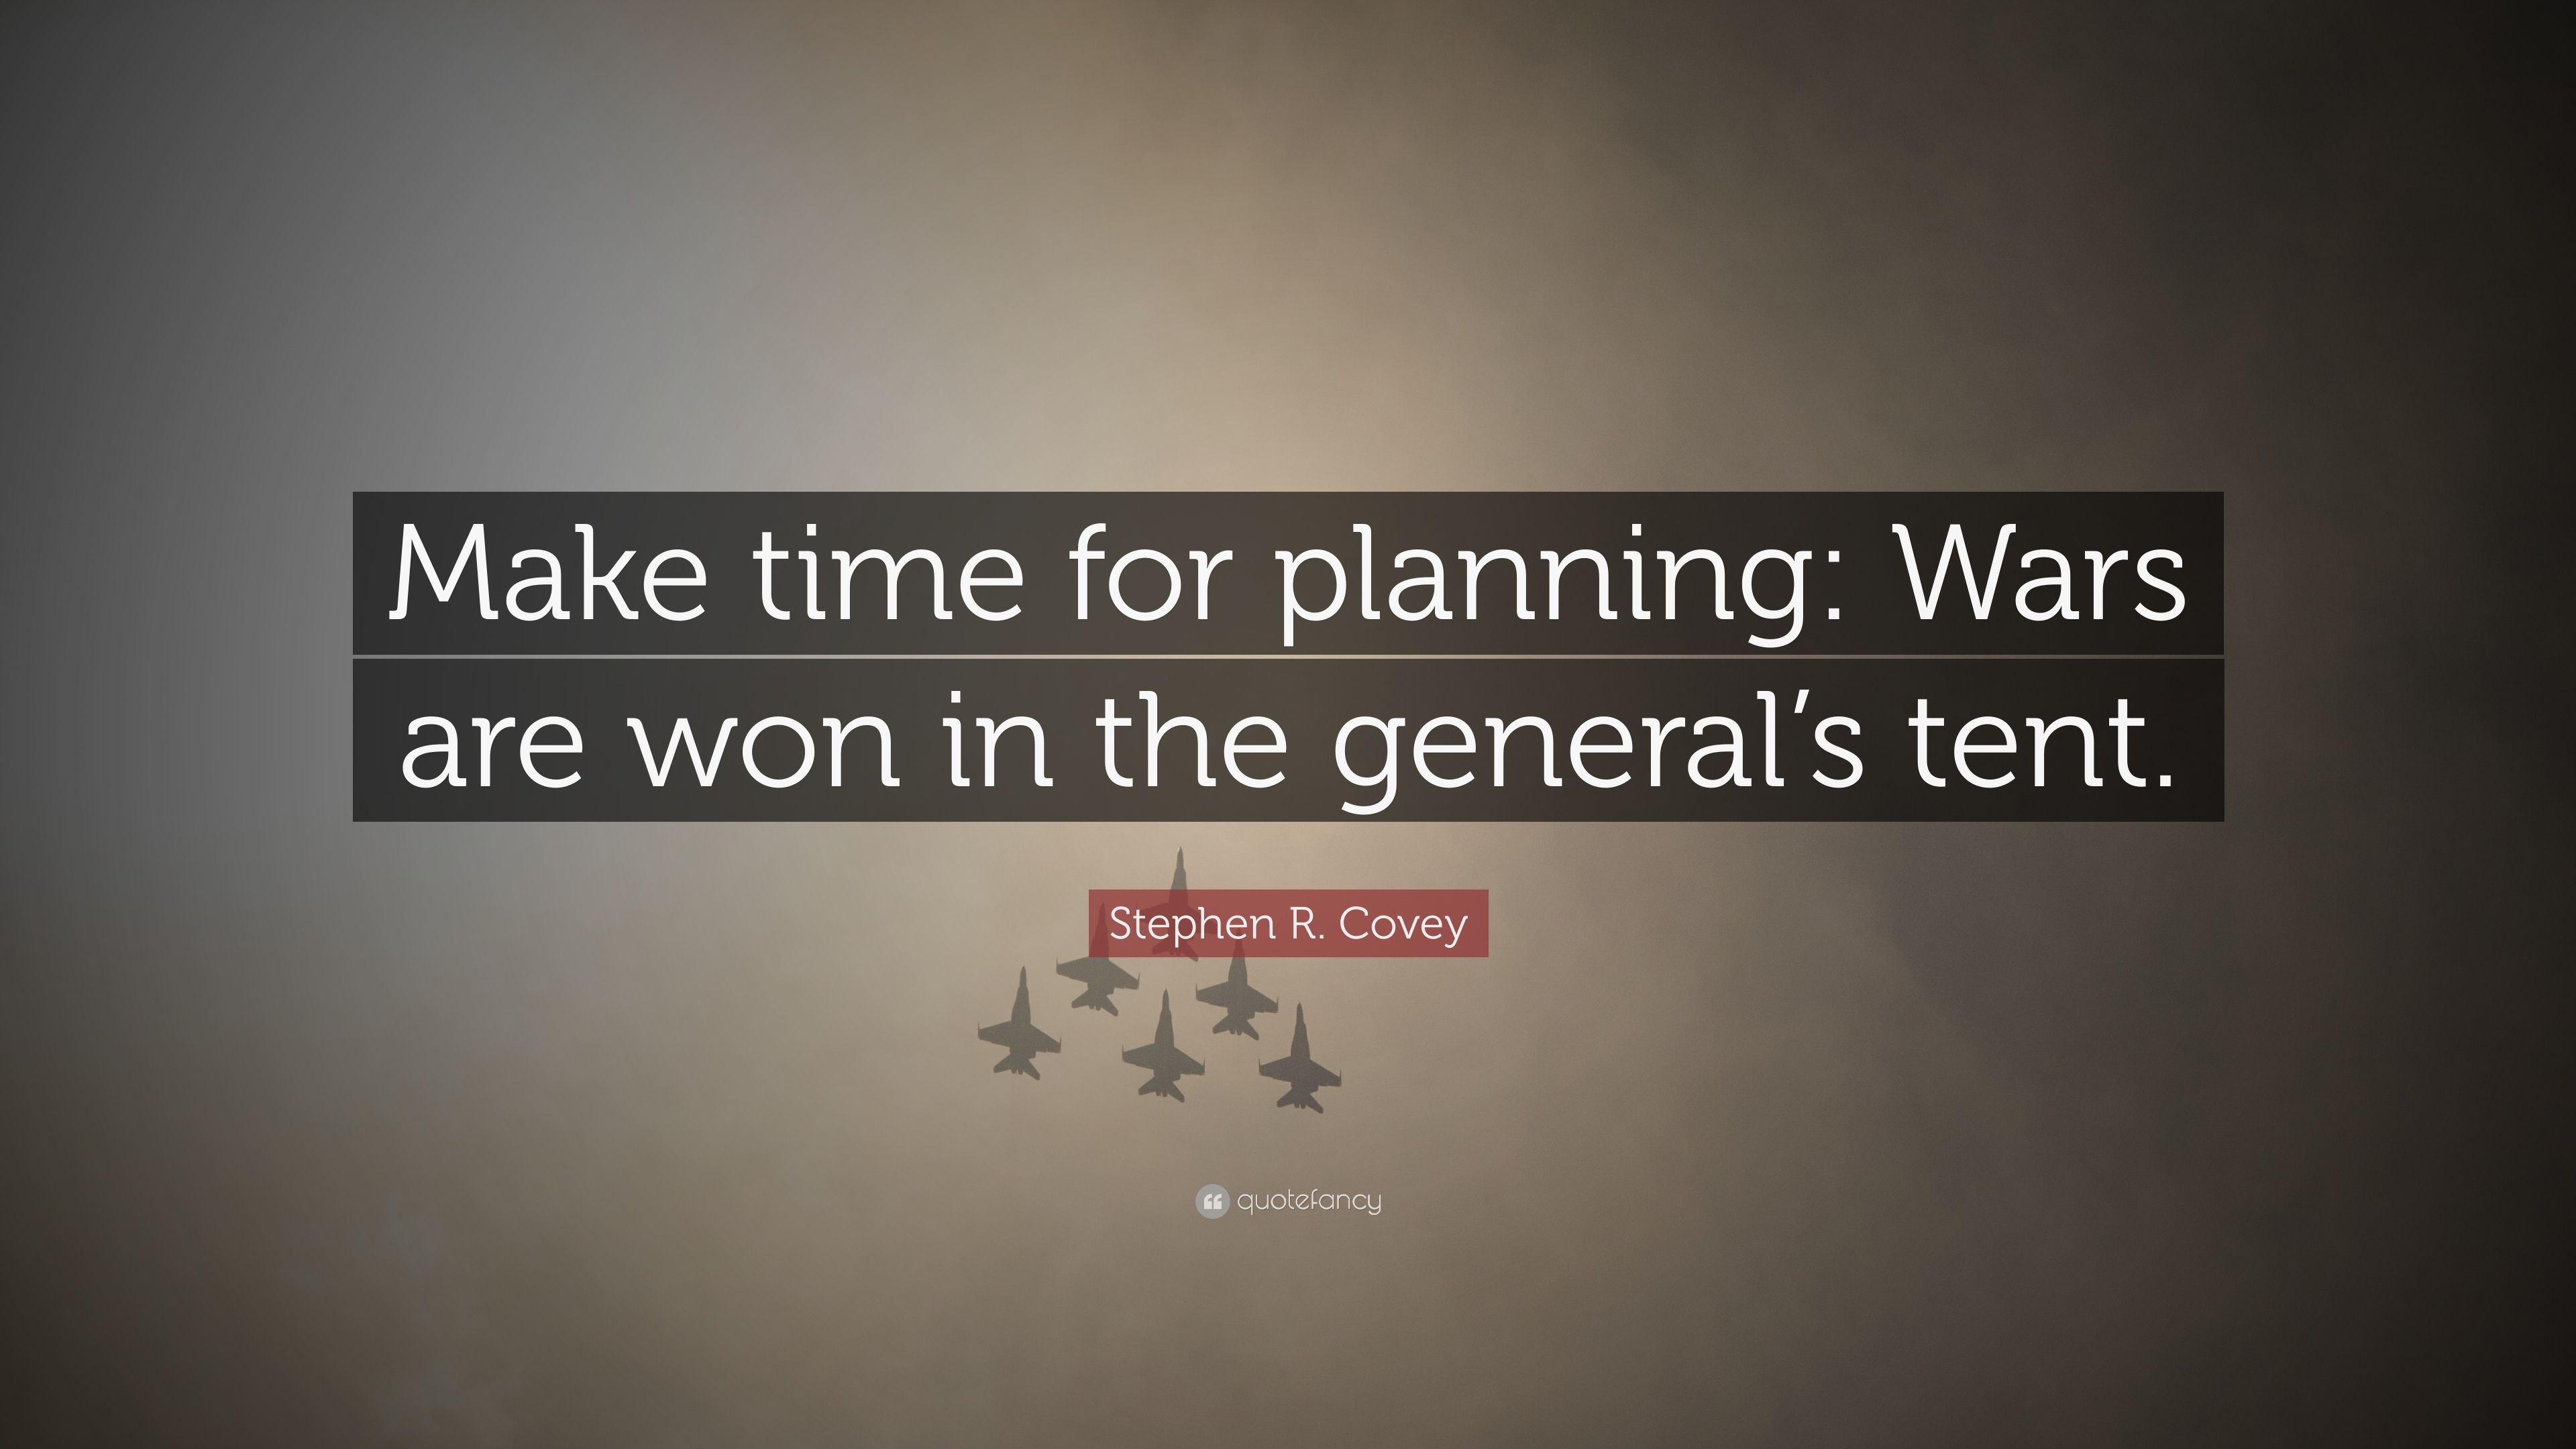 Stephen R. Covey Quote: “Make time for planning: Wars are won